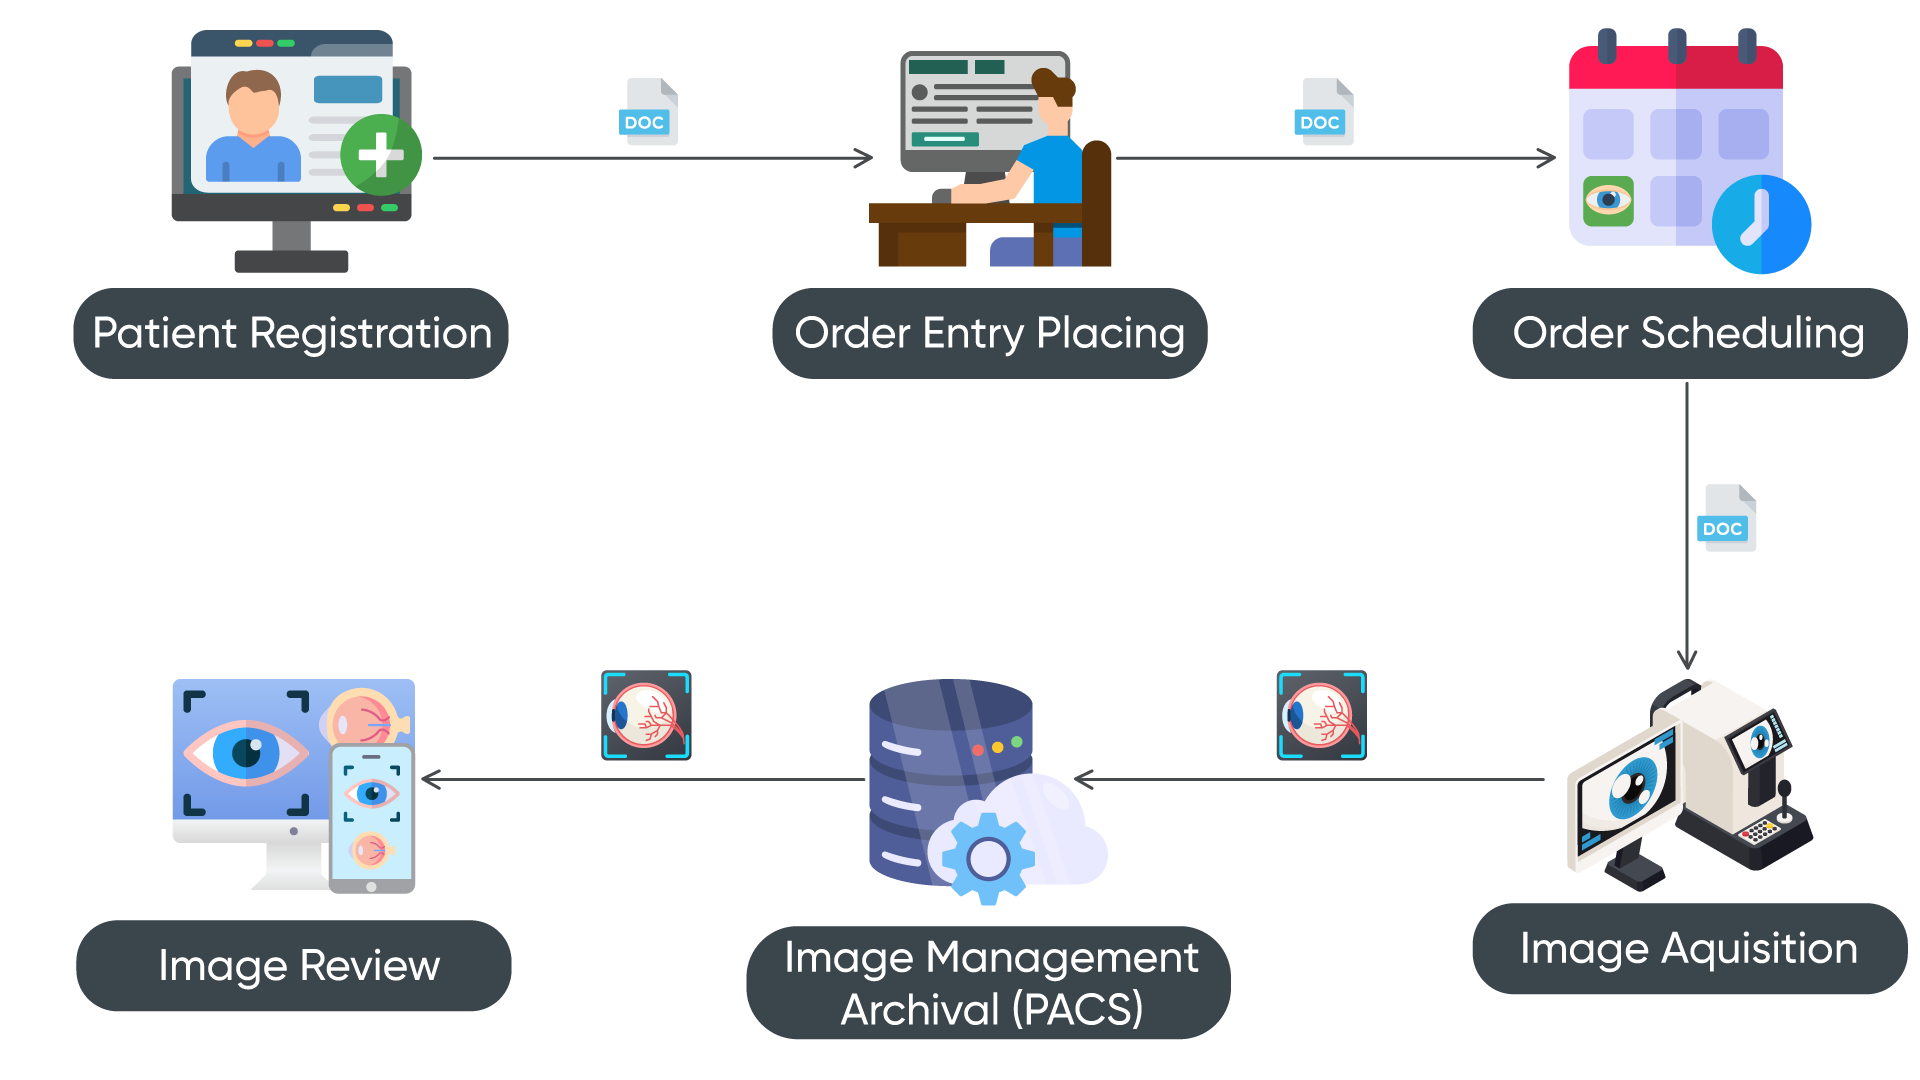 An image showing the complete workflow of image management and surgical planning in Ophthalmology EMR software